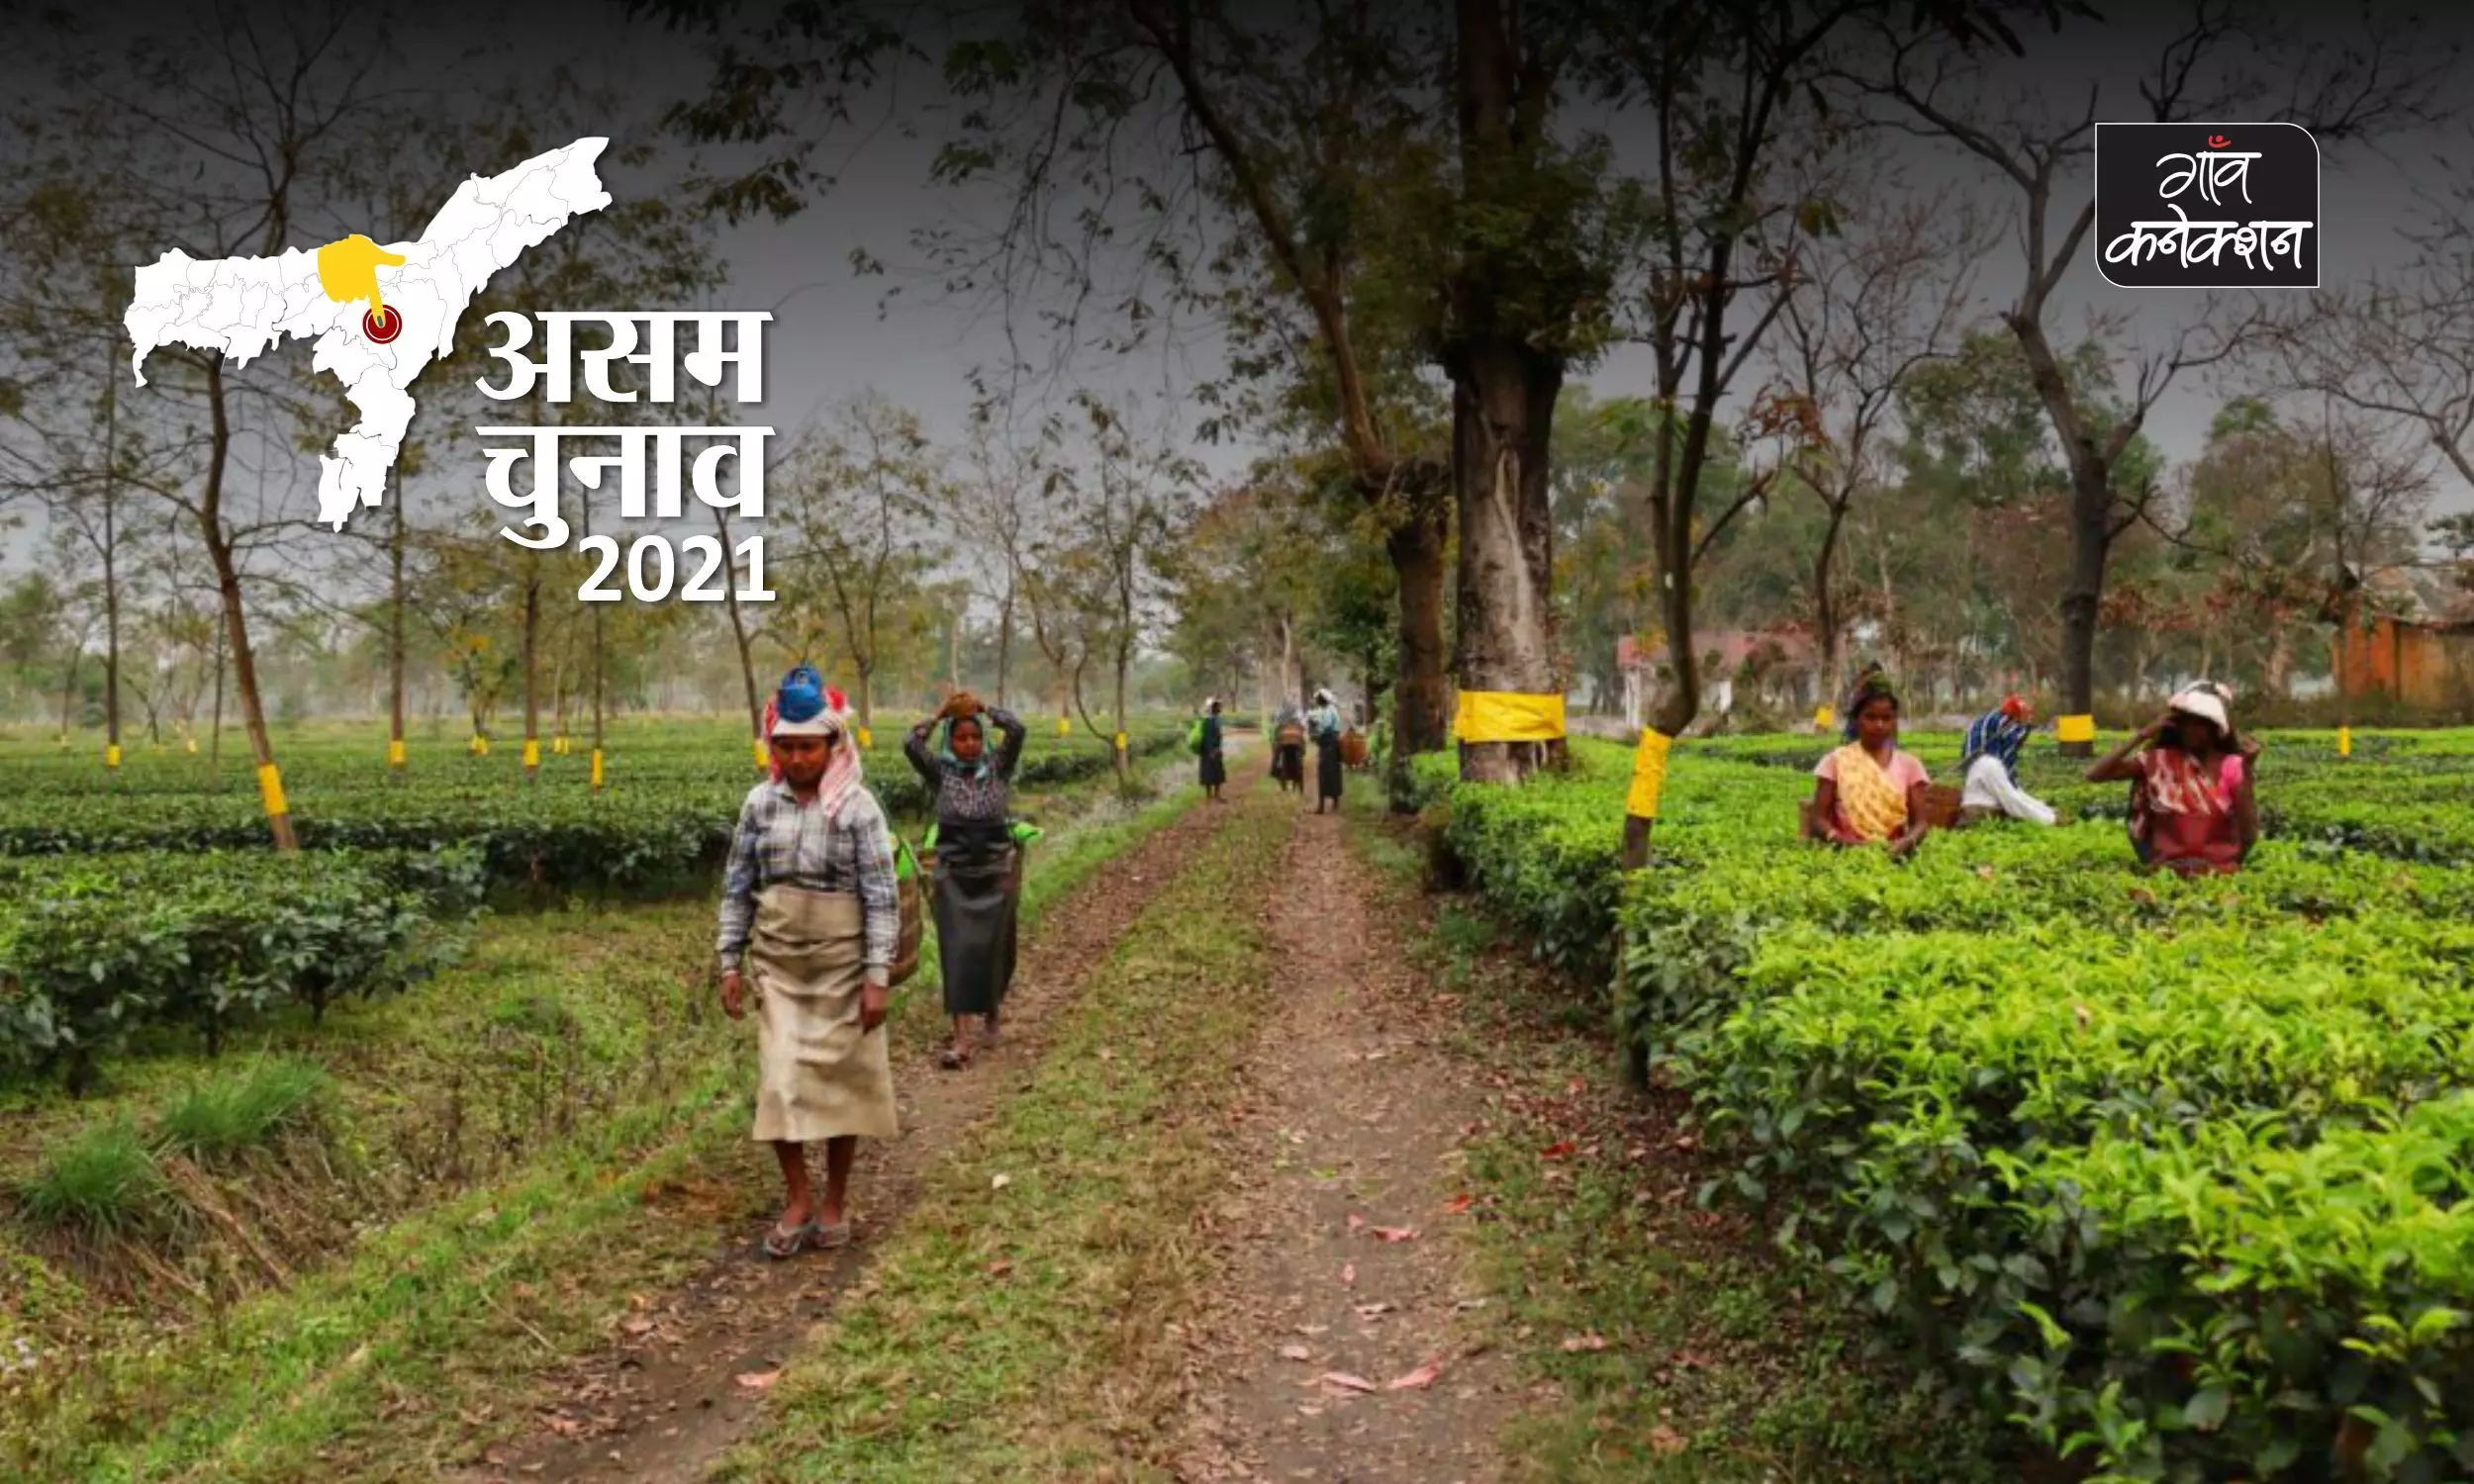 Assam Election 2021: The story of Assam’s tea workers and broken election promises